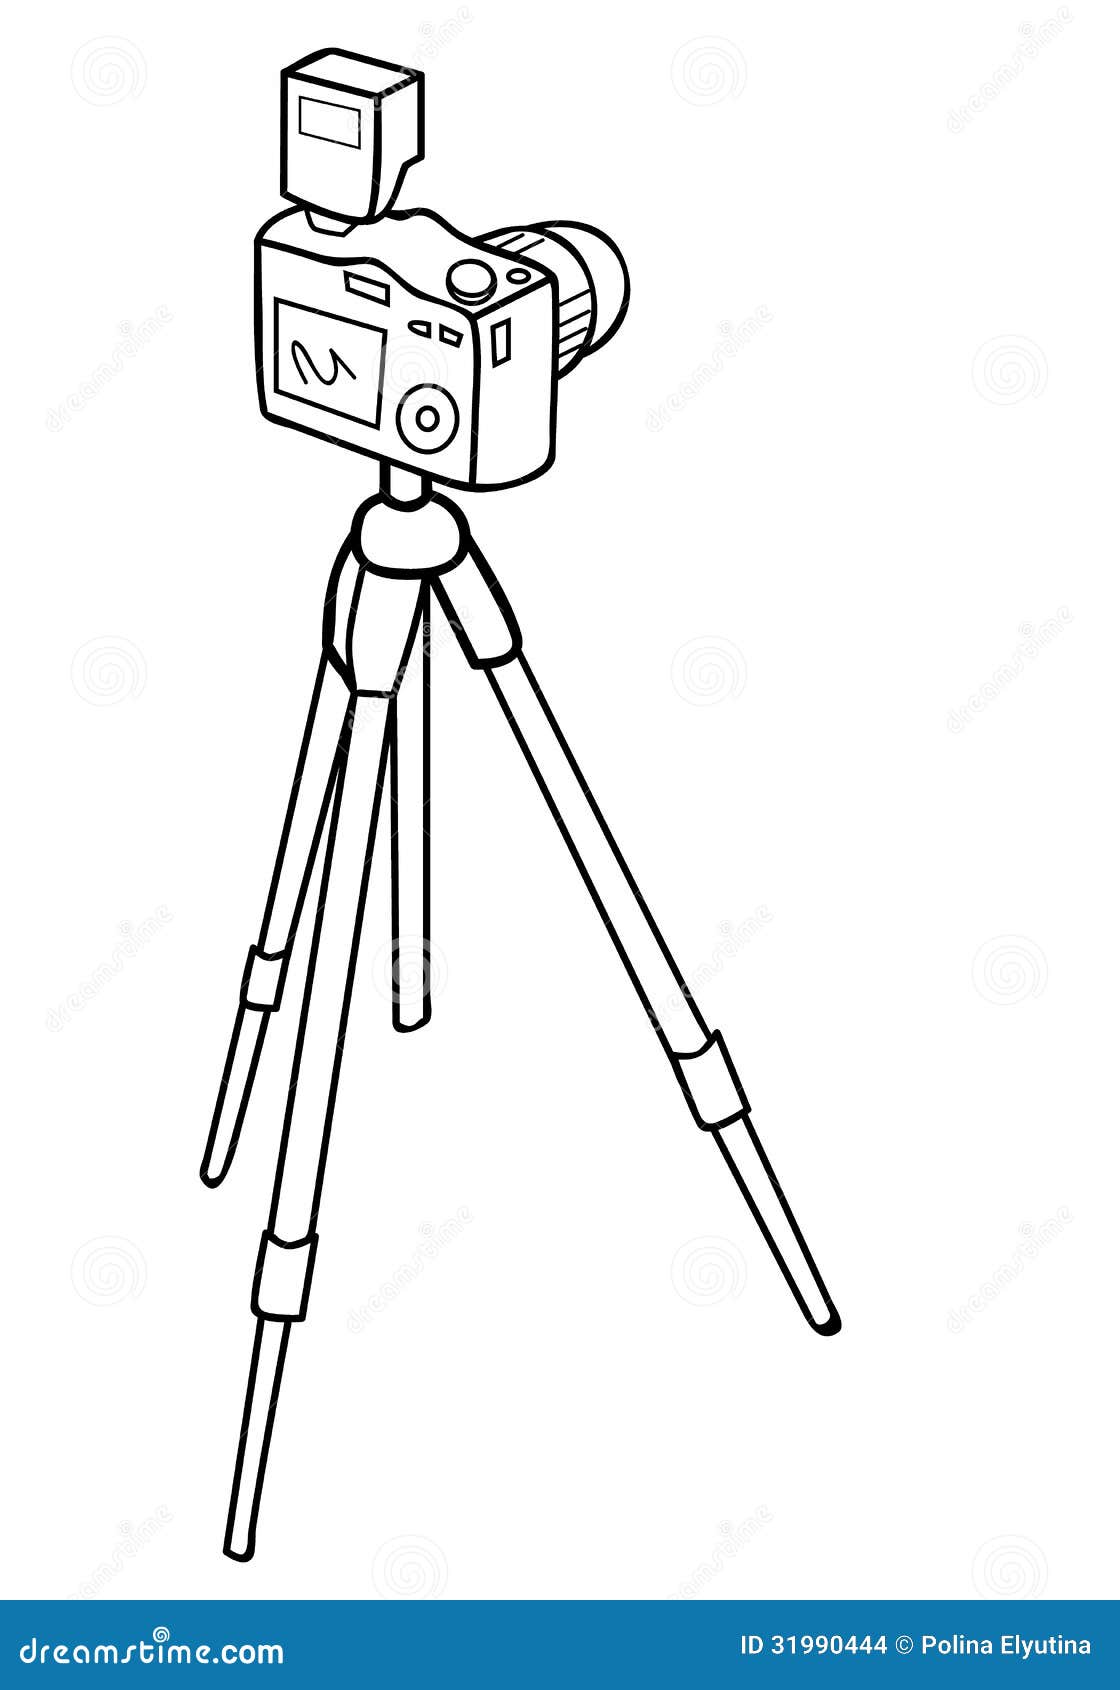 camera stand clipart - photo #18